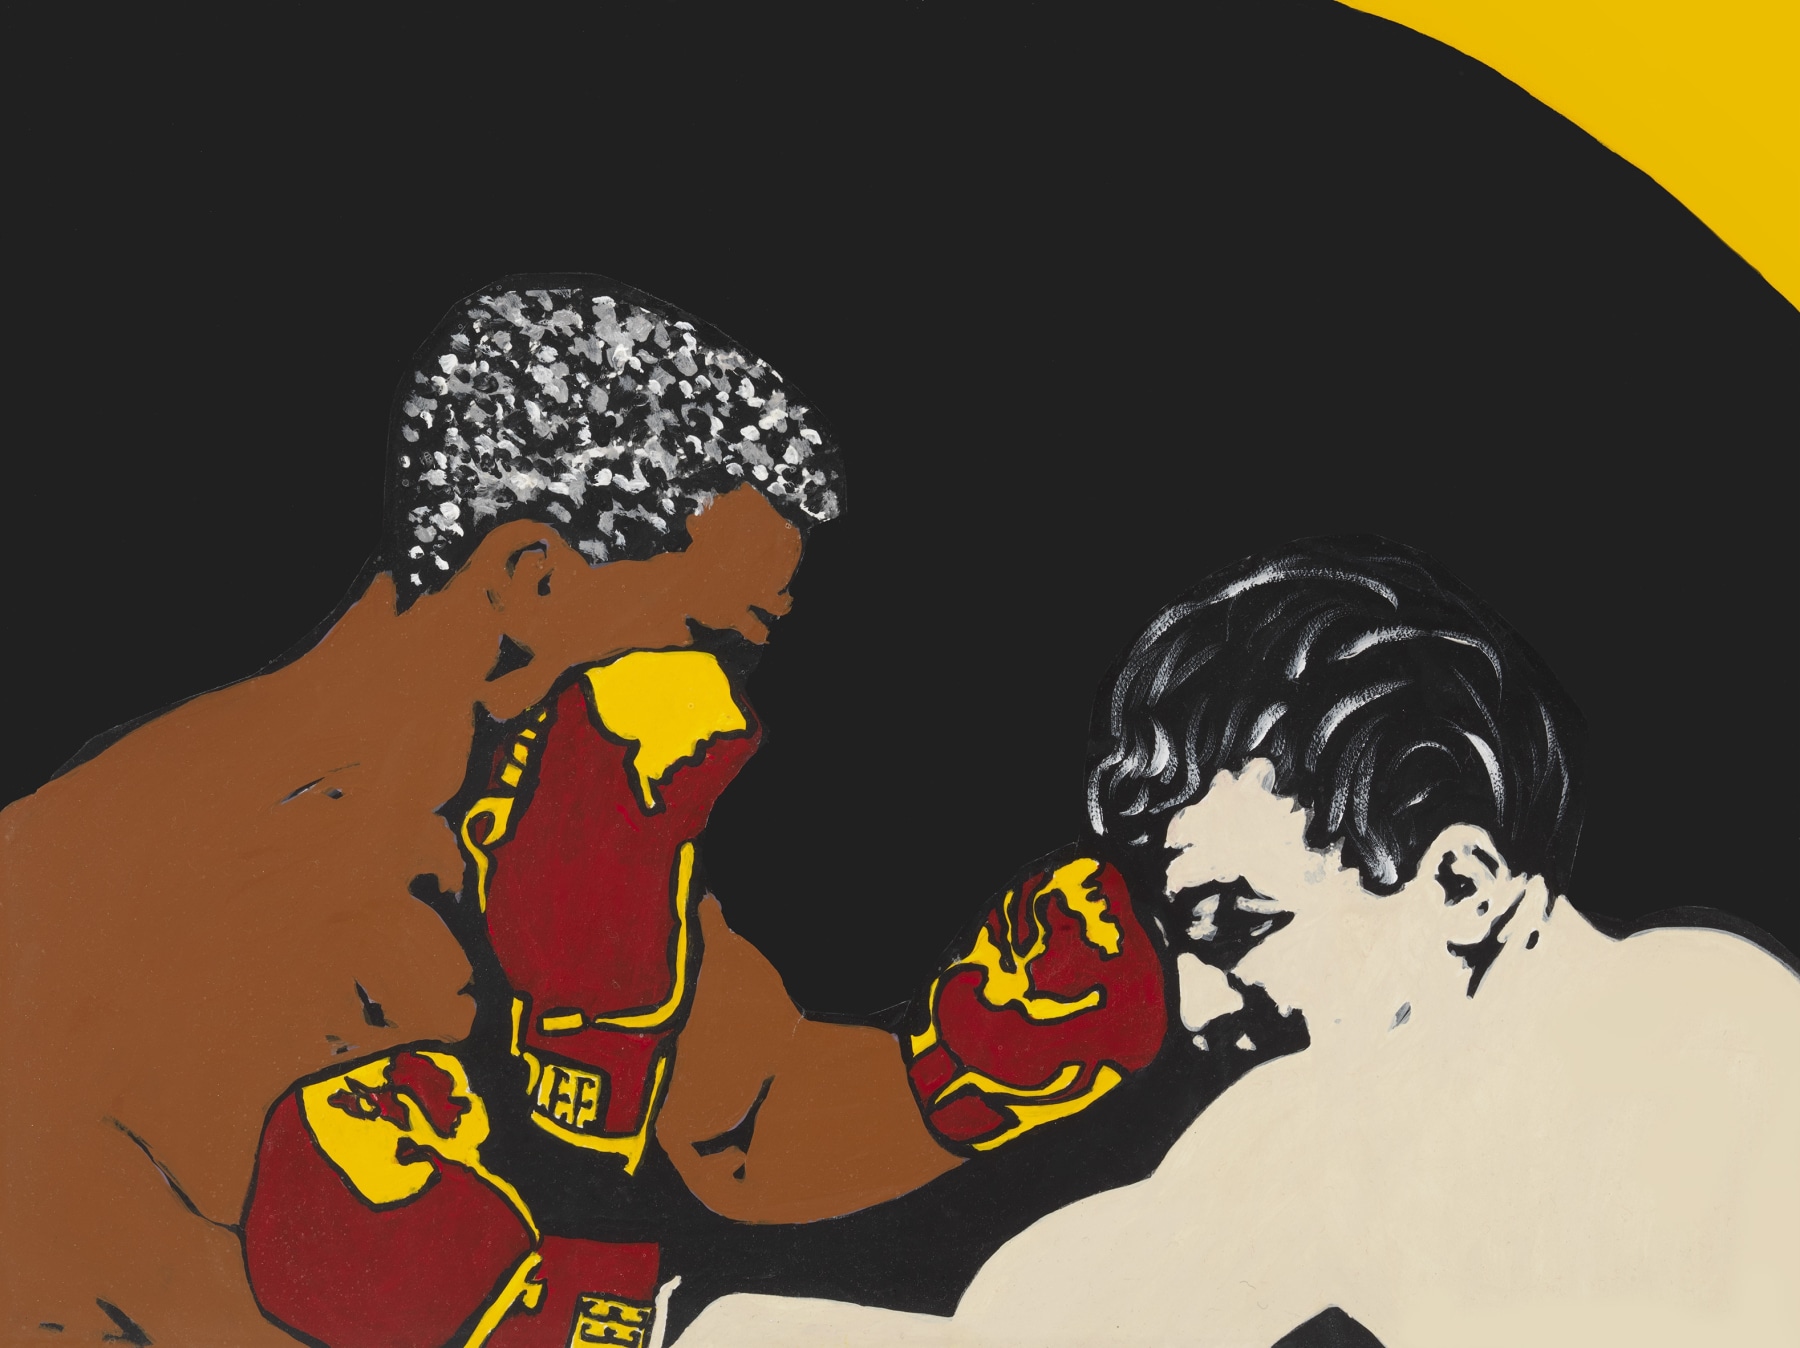 Prize Fight (Jake LaMotta and &quot;Blackjack&quot; Billy Fox), 1997, Acrylic and paper collage on canvas